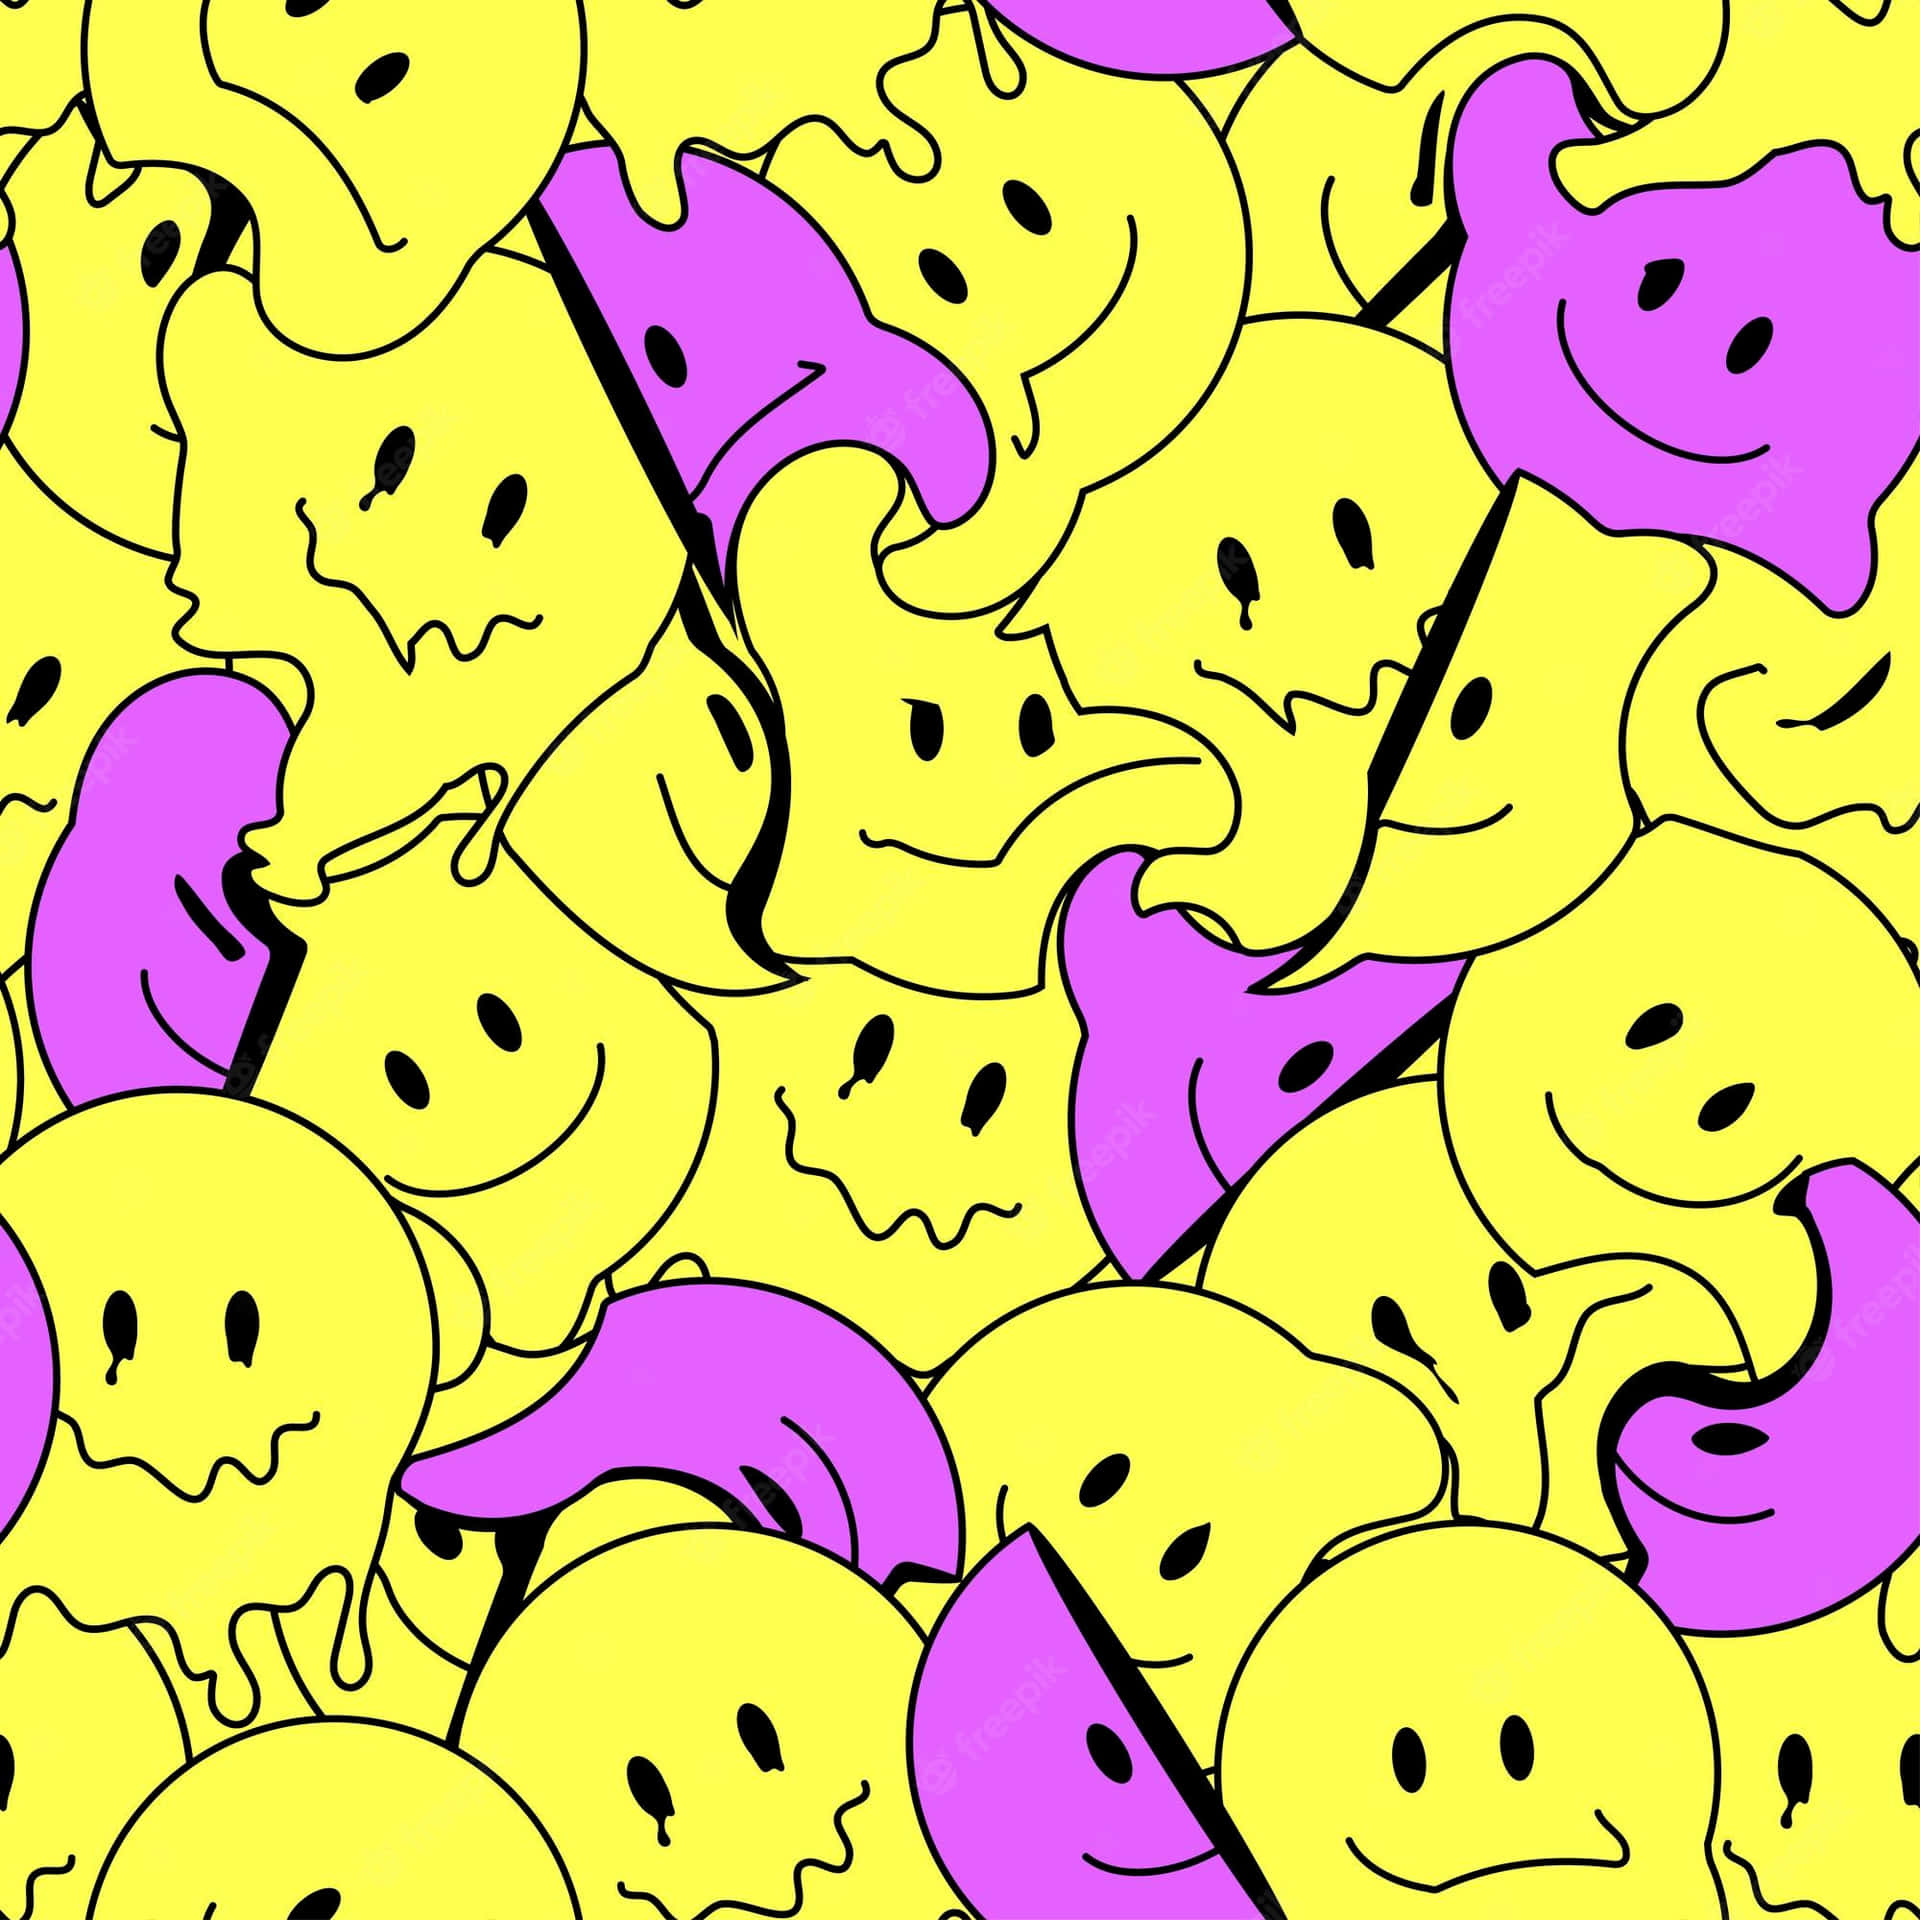 Cool Melted Seamless Pattern Aesthetic Trippy Smiley Face Wallpaper